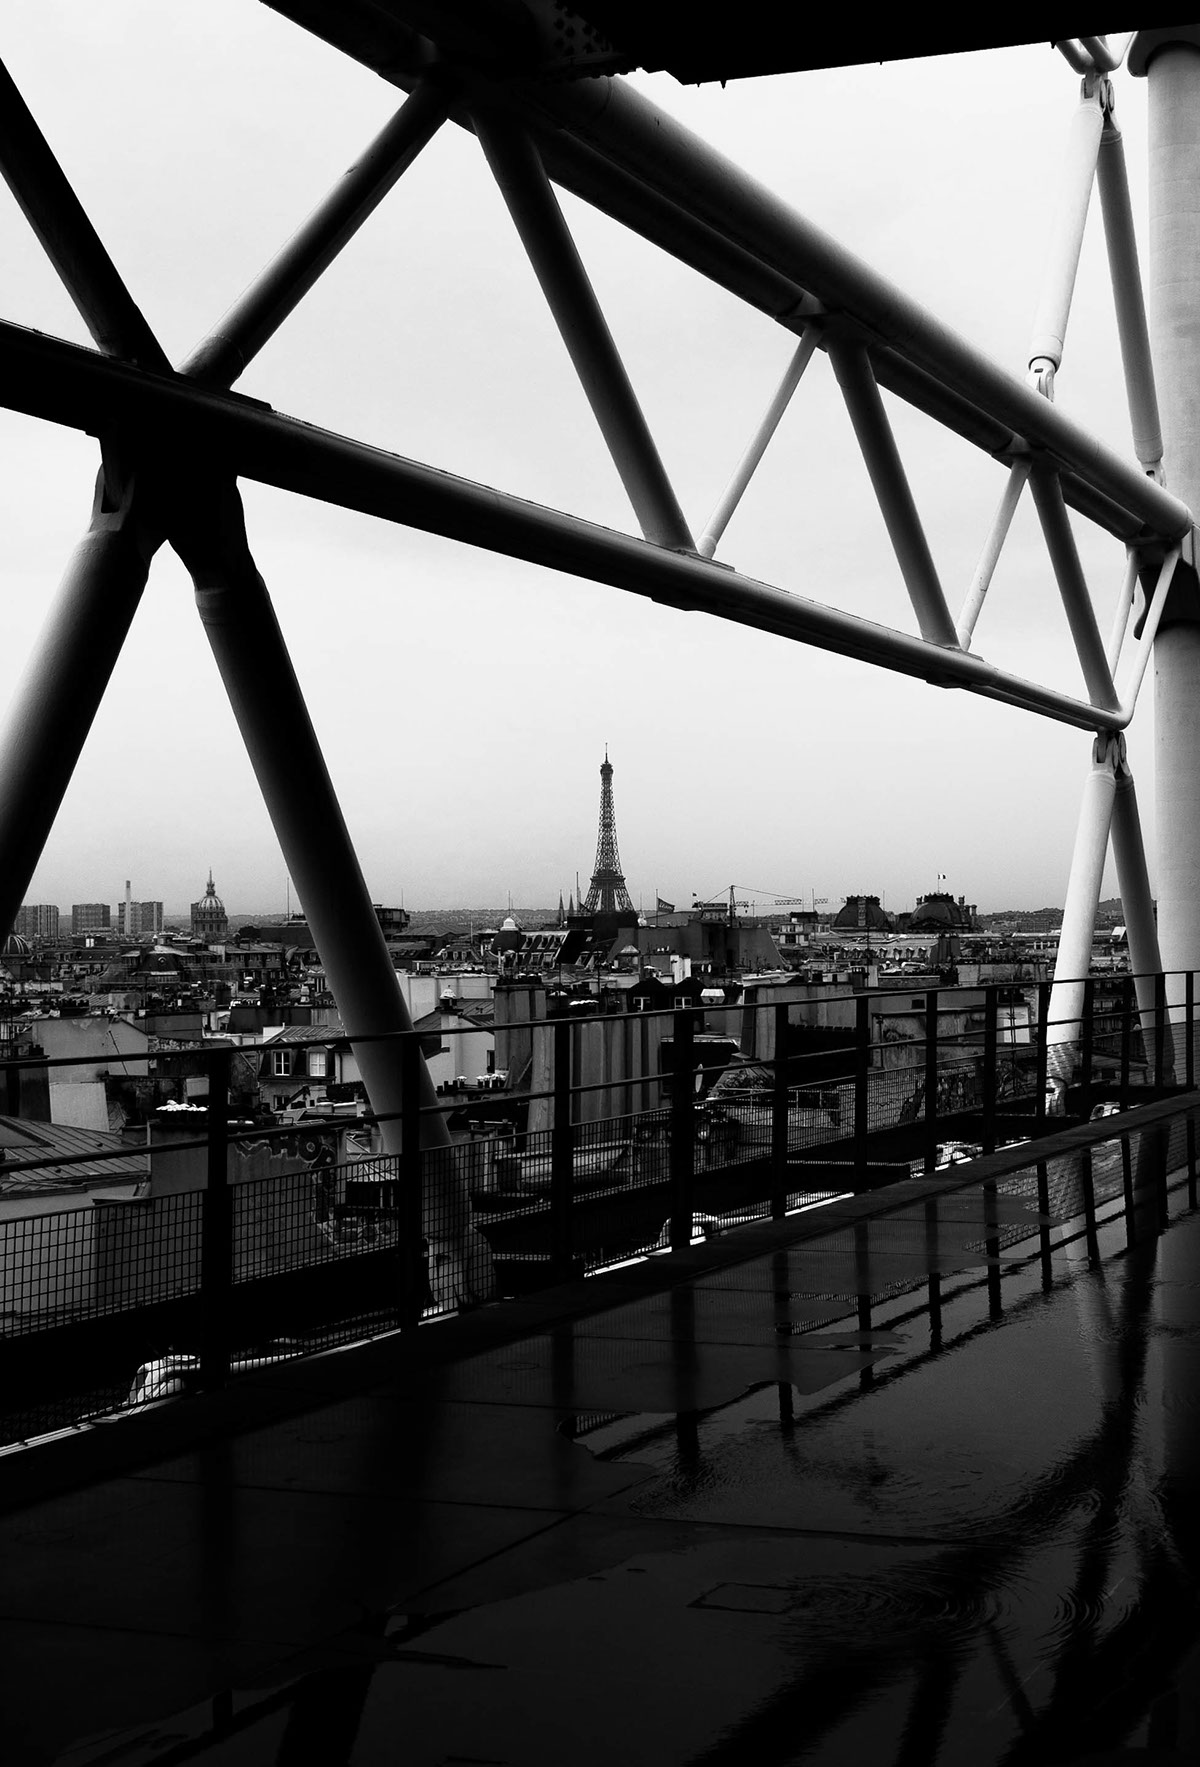 Adobe Portfolio versailles buildings reflections steel structure symmetry eiffel tower wings alley windows france Perspective Paris black and white